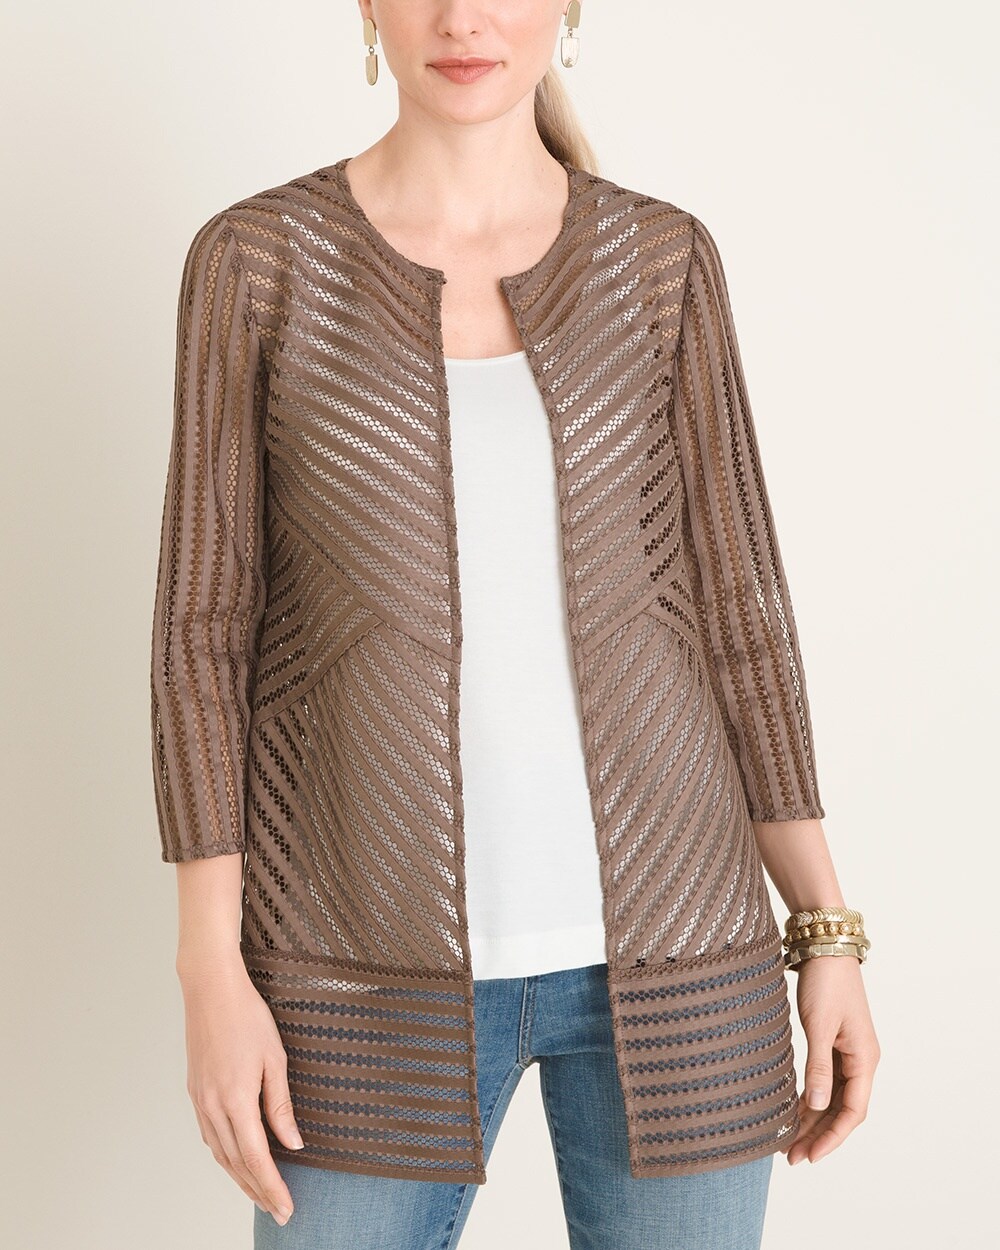 Travelers Collection Neutral Strip Jacket